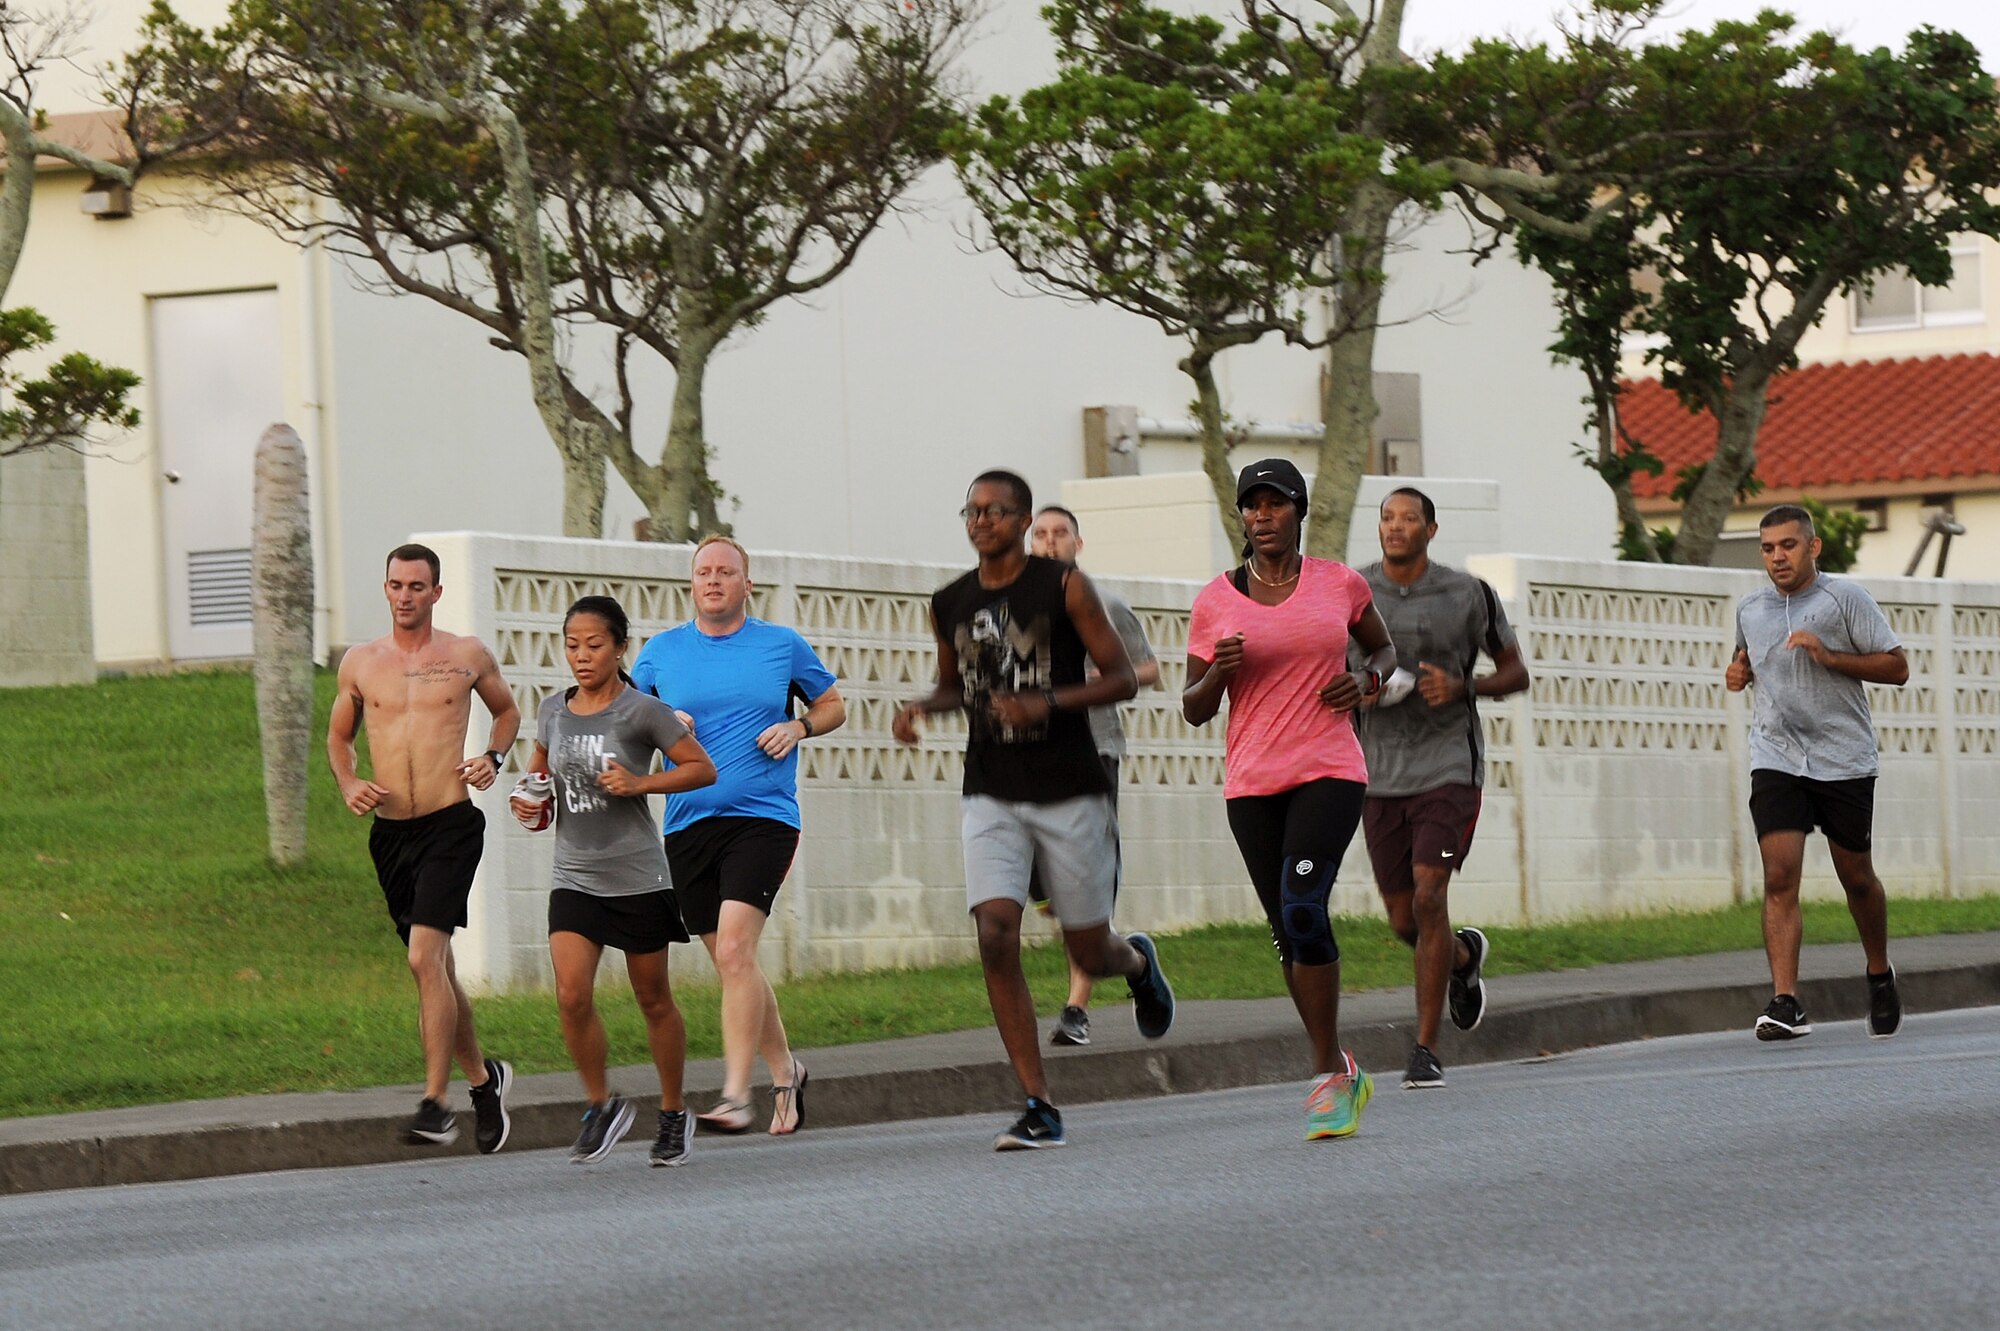 A small group from the first session of Kadena’s running improvement program finishes a light run through a neighborhood together on Kadena Air Base, Japan, Aug. 5, 2015. After an initial one-and-a-half mile timed assessment, the 136 participants were split into smaller groups by ability level, allowing those of comparable skill to push each other and help each other improve. (U.S. Air Force photo by Airman 1st Class Zade C. Vadnais)